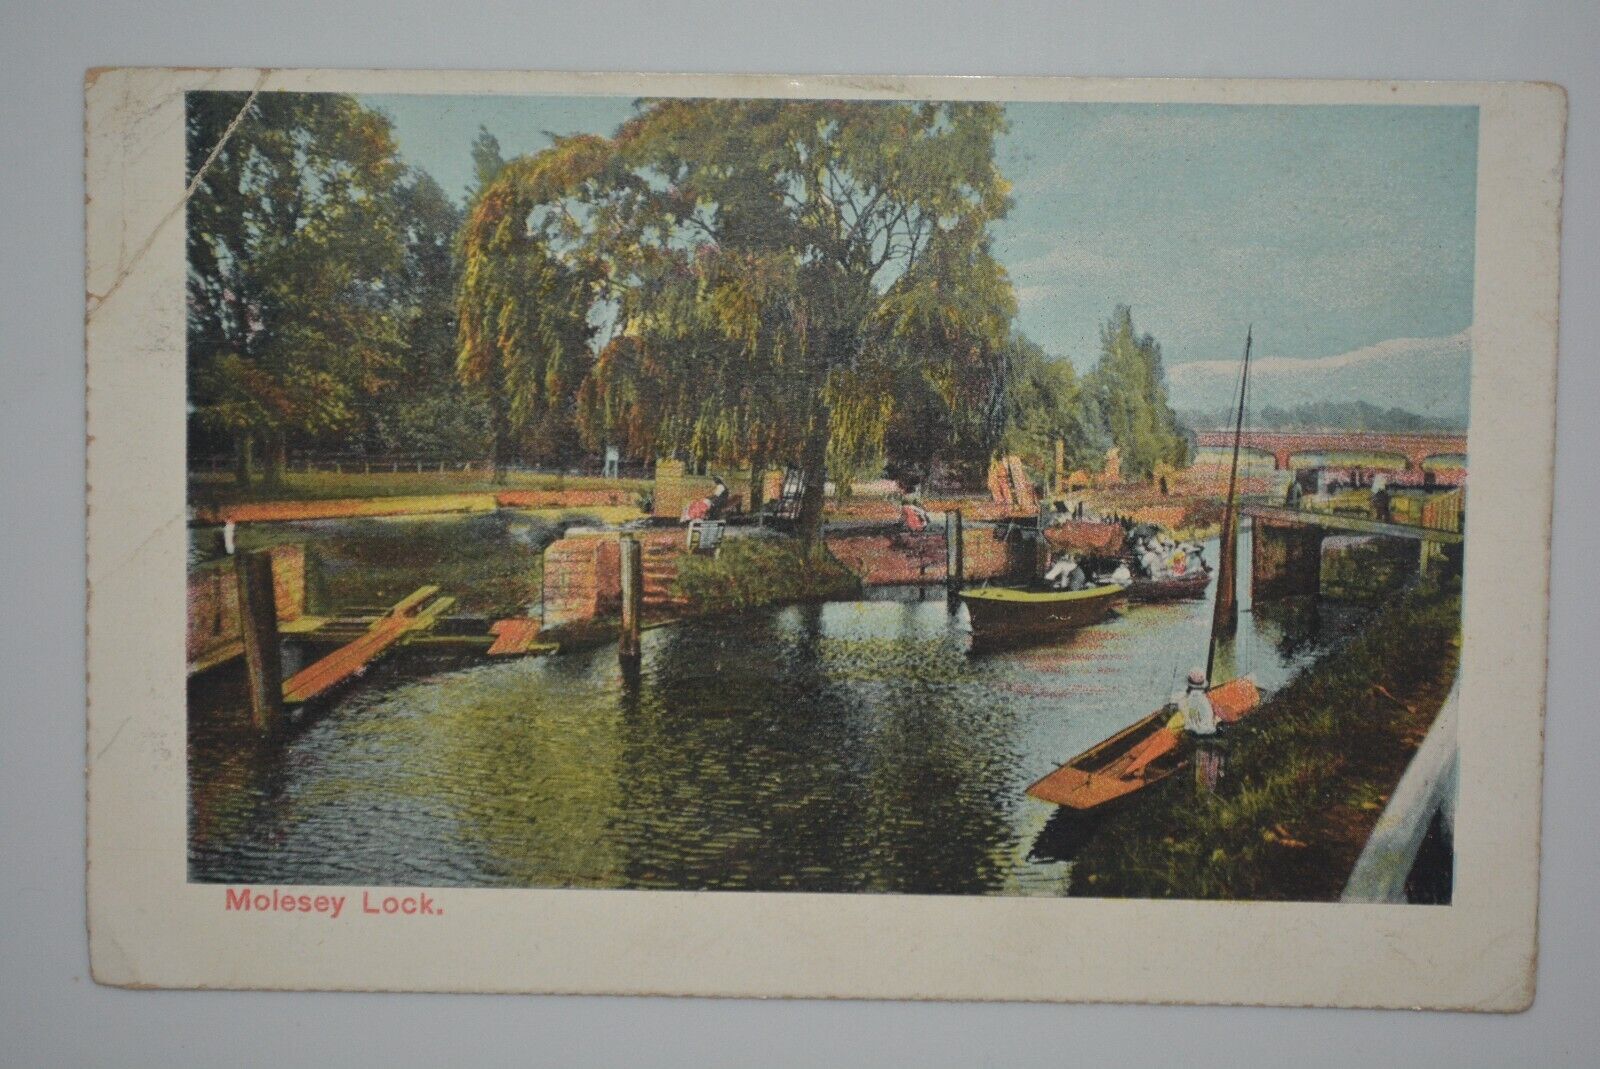 Molesey Lock on River Thames (Surrey, United Kingdom) Postcard (POSTED)